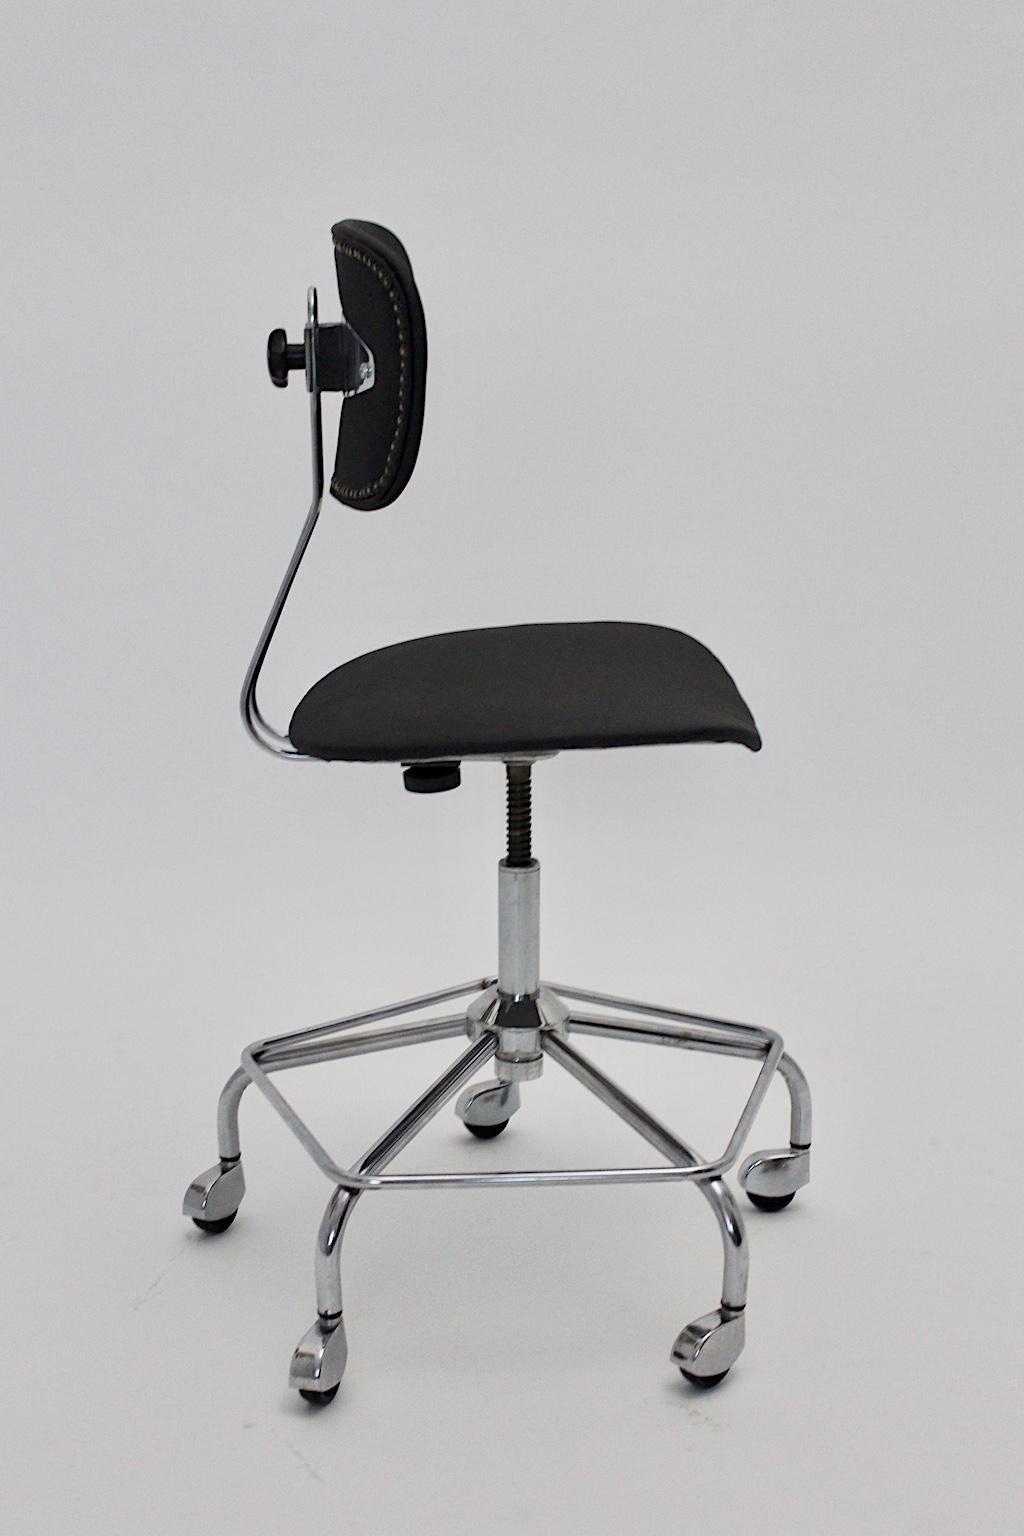 Mid-Century Modern vintage black desk chair of office chair or swivel chair, which was designed in the style of Egon Eiermann, Germany 1950s.
The swiveling desk chair is adjustable from up to down. The chromed metal base shows five chromed wheels